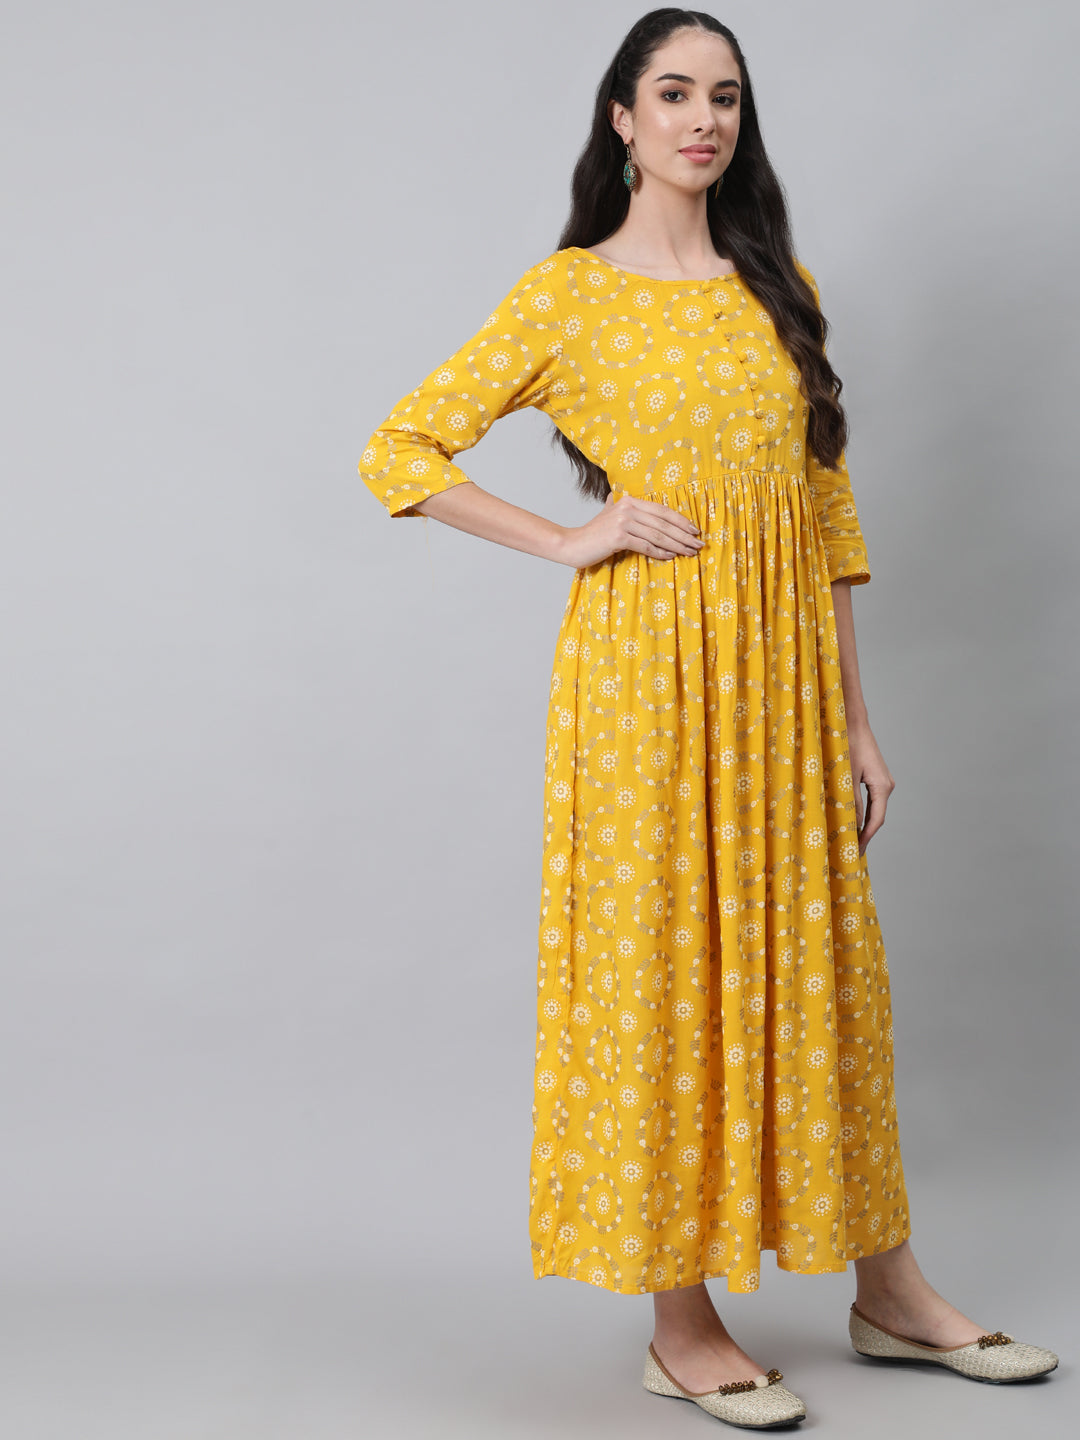 Women's Yellow Ethnic Printed Flared Dress With Three Quarter Sleeves - Nayo Clothing